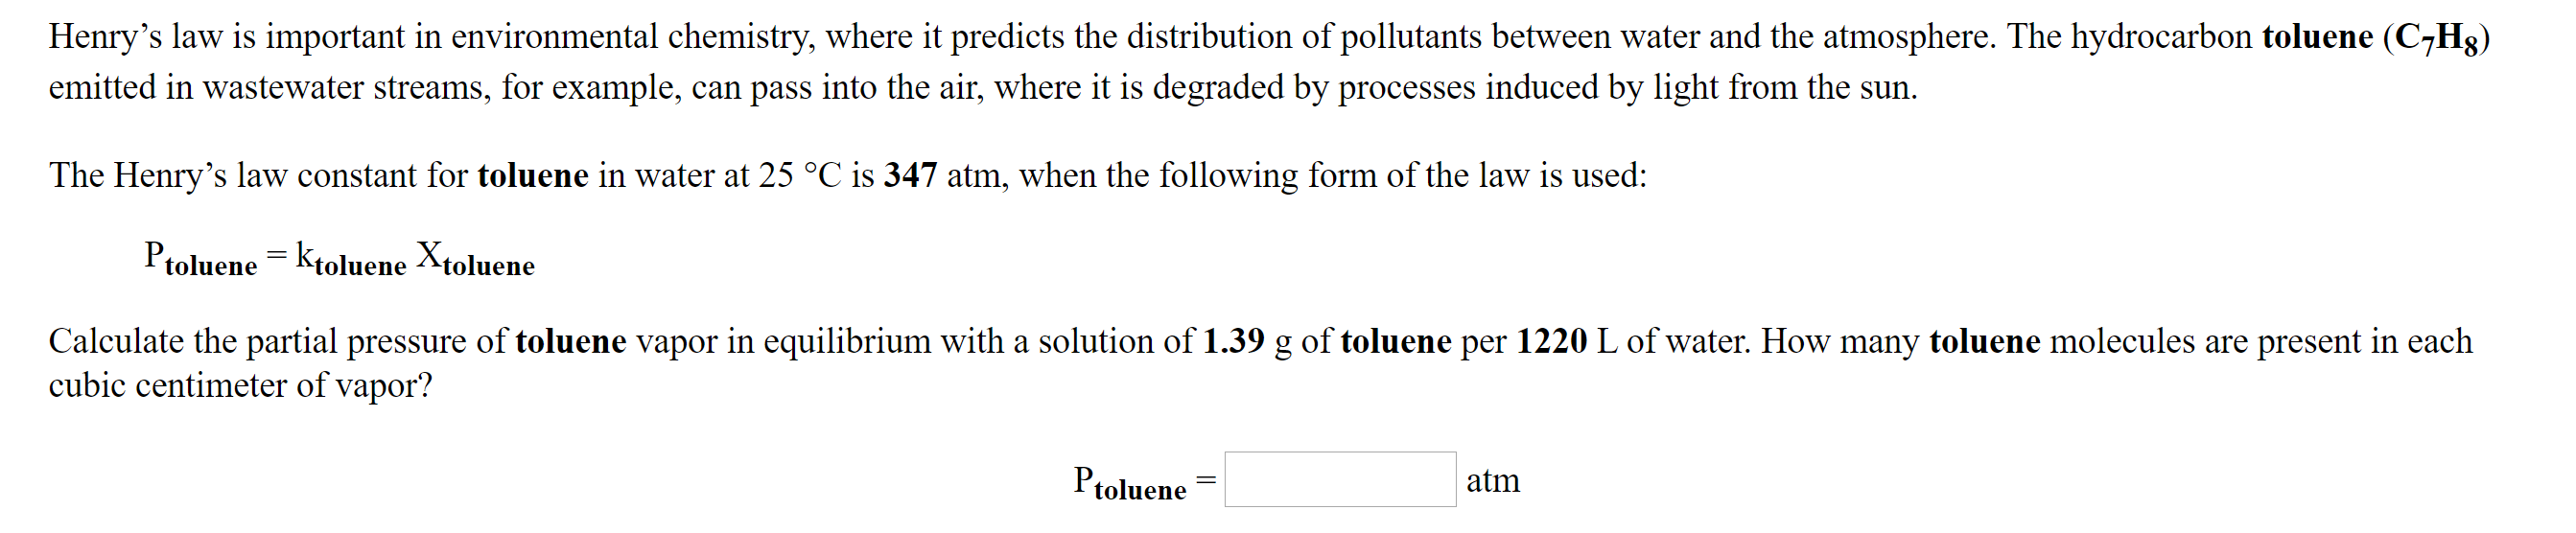 Henry's law is important in environmental chemistry, where it predicts the distribution of pollutants between water and the atmosphere. The hydrocarbon toluene (C7H8)
emitted in wastewater streams, for example, can pass into the air, where it is degraded by processes induced by light from the sun.
The Henry's law constant for toluene in water at 25 °C is 347 atm, when the following form of the law is used:
Ptoluene = Ktoluene Xtoluene
Calculate the partial pressure of toluene vapor in equilibrium with a solution of 1.39 g of toluene per 1220 L of water. How many toluene molecules are present in each
cubic centimeter of vapor?
Ptoluene
atm
